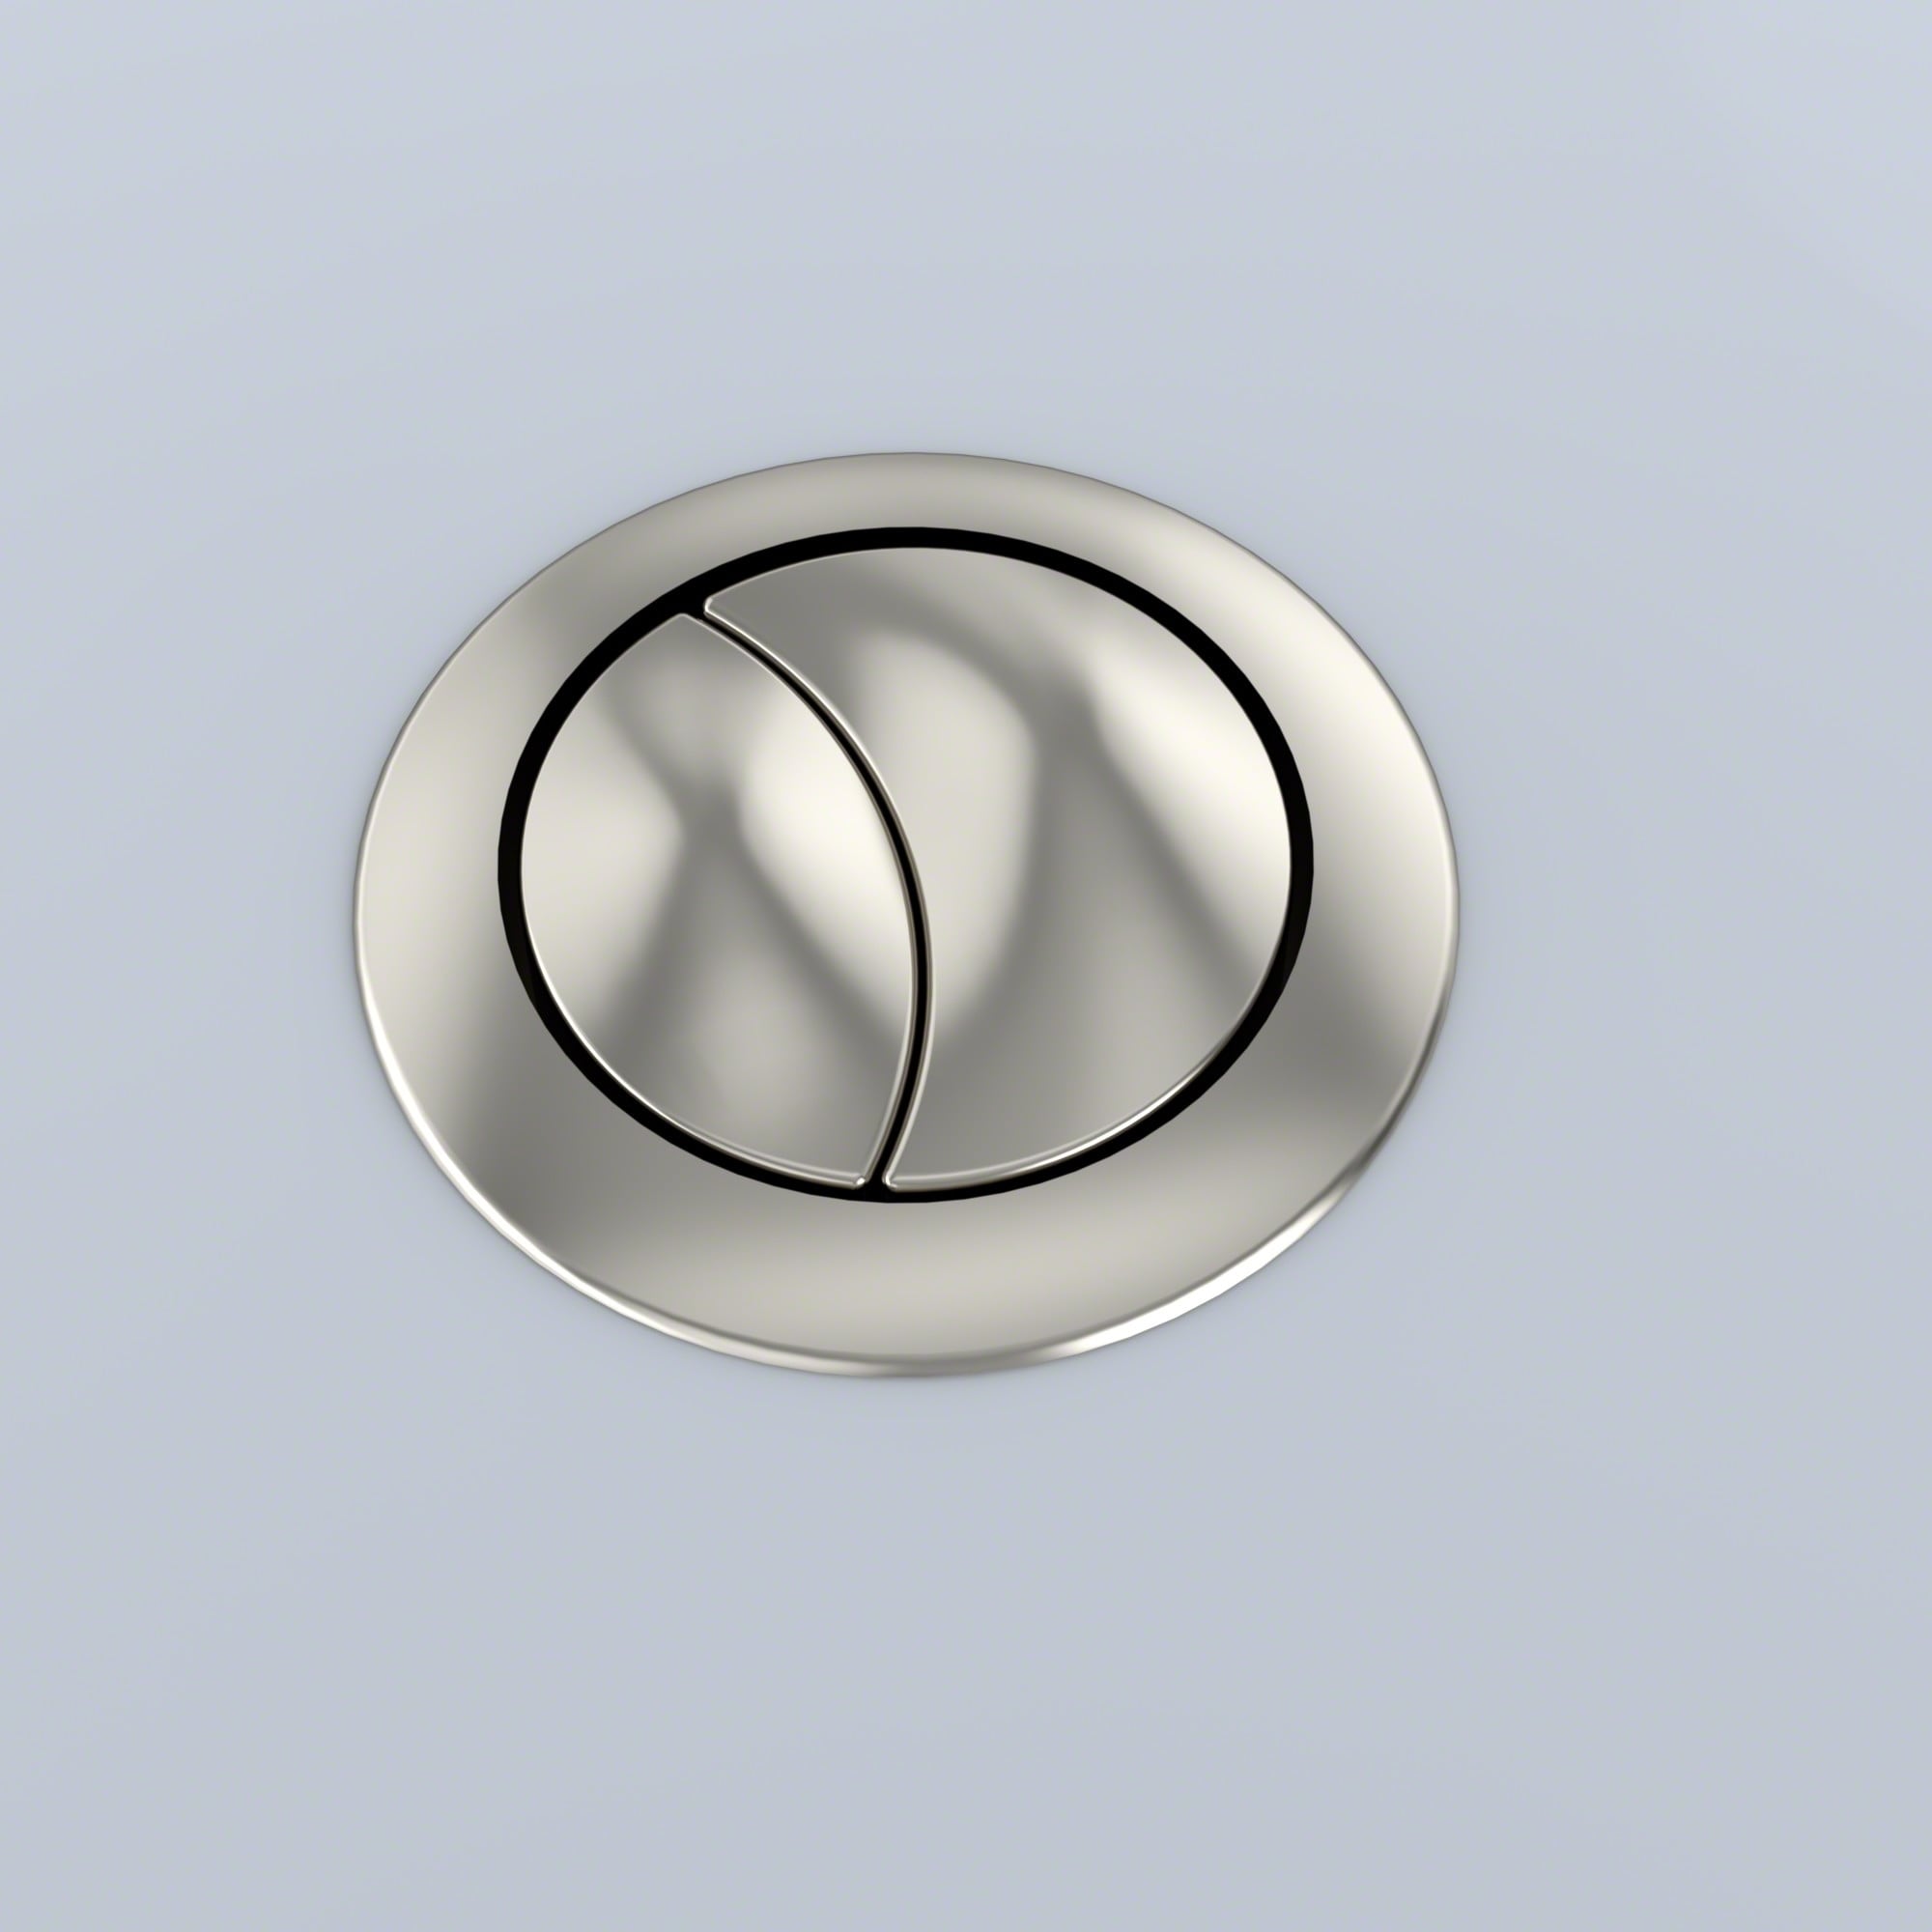 Toto Aquia Push Button MS654 - 53Mm Spare Part, Brushed Nickel (THU340#BN)